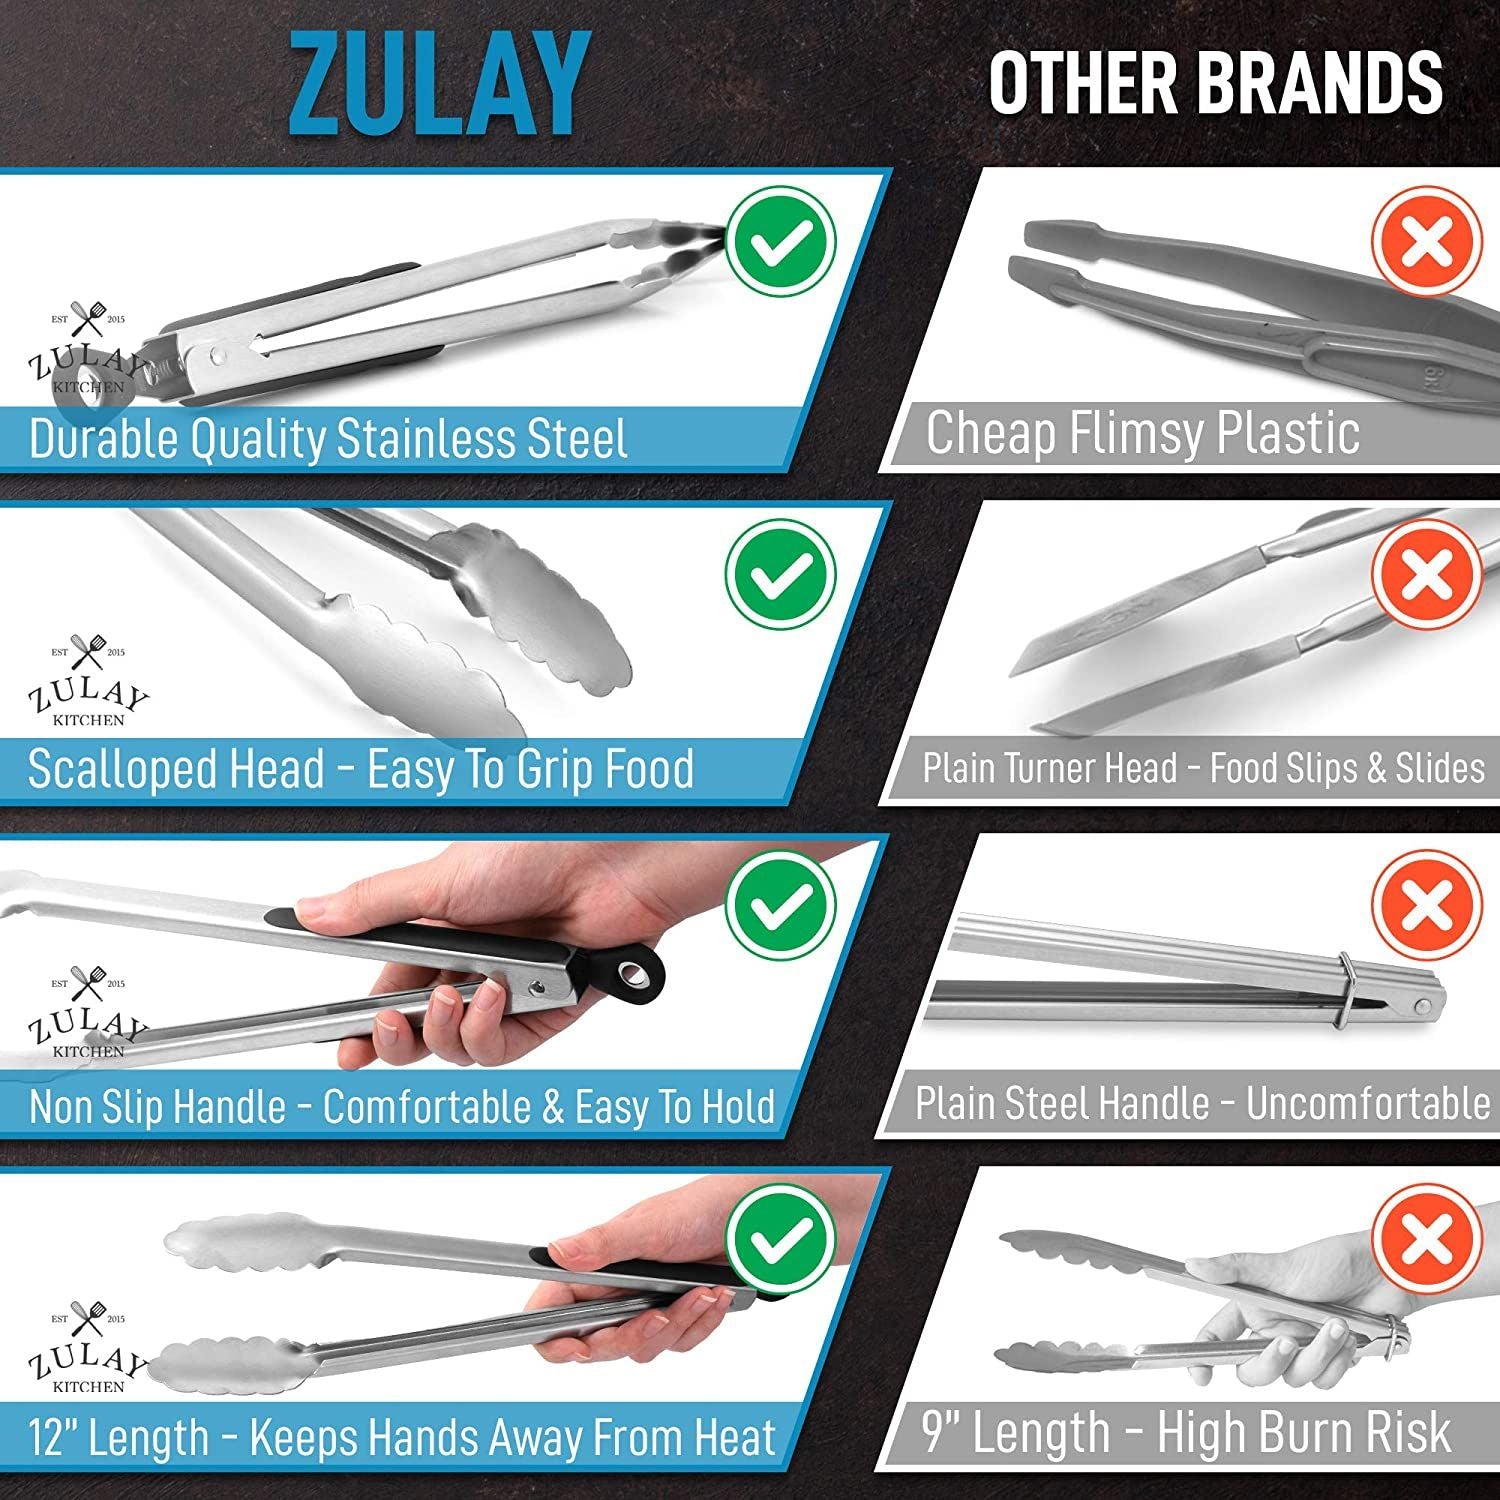 Zulay 2 Pack 9 inch & 12 inch Tongs for Cooking with Silicone Tips - Stainless Steel Kitchen Tongs with Lock Mechanism - Rose Gold - Black